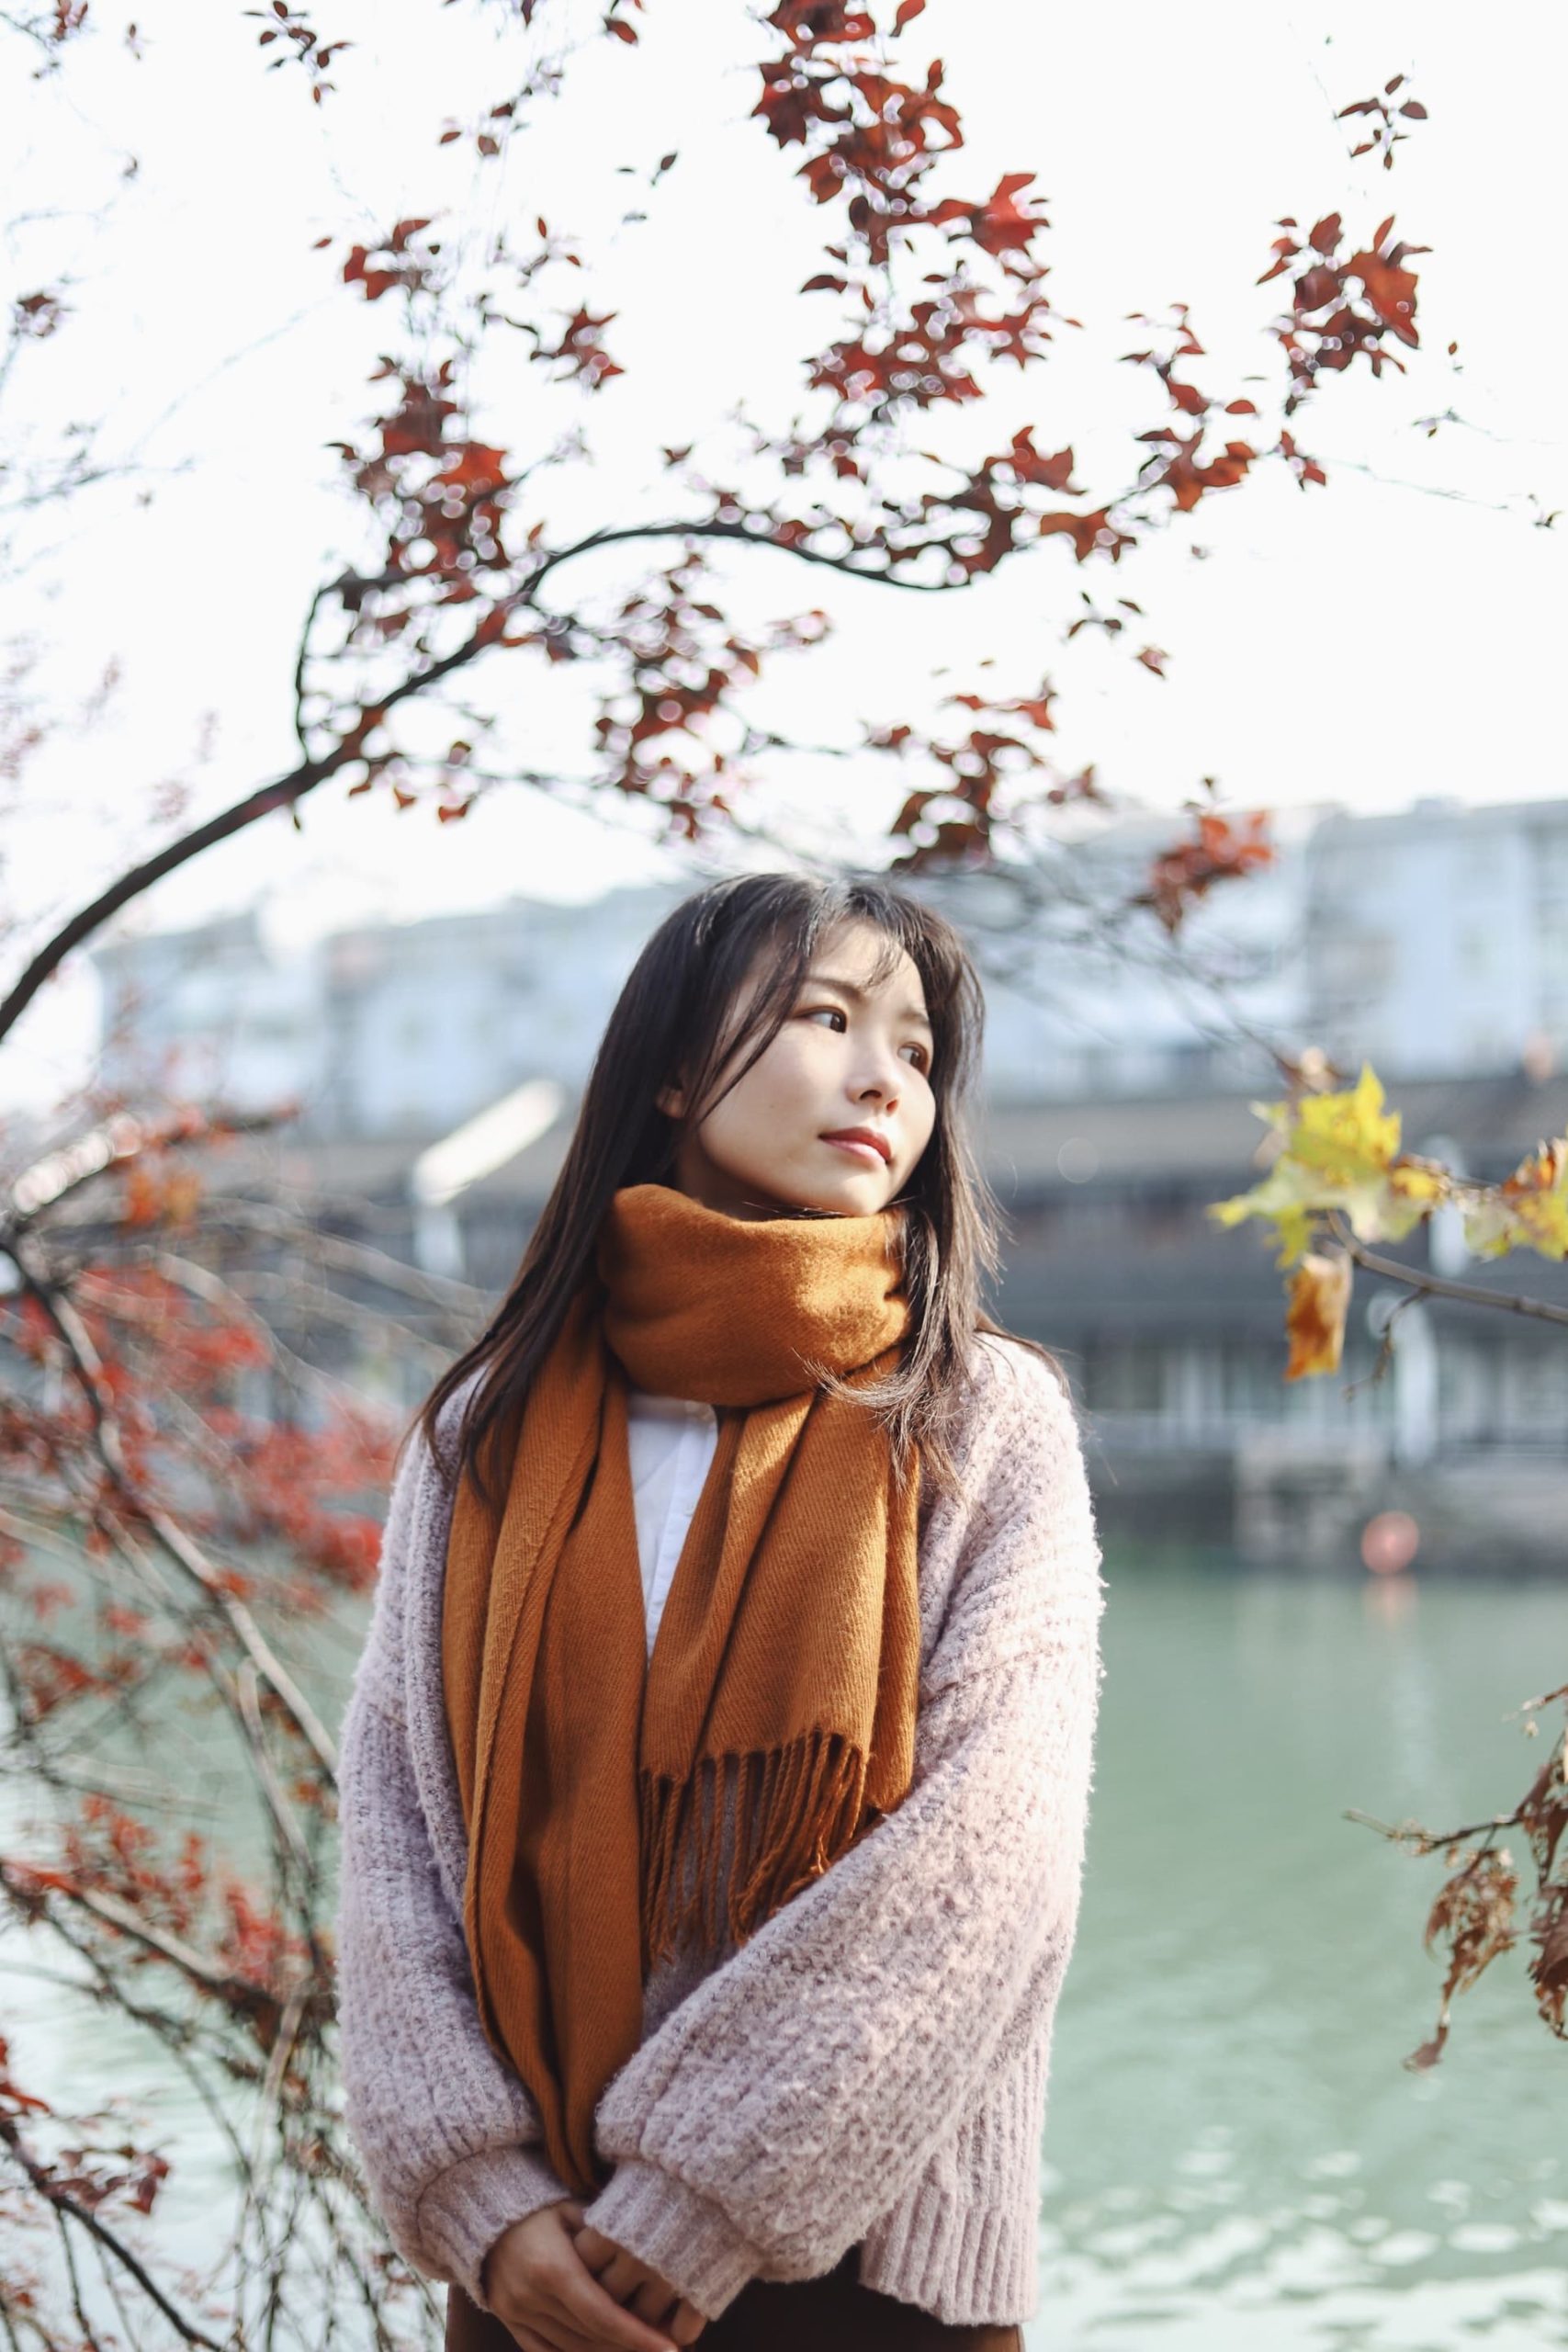 Image of a young woman standing next to a river wearing an orange scarf. She represents an adolescent who may seek support from a teen therapist in Los Angeles, CA. Therapy for teens in Los Angeles, CA can help teenagers and young adults explore themselves. | 91006 | 90071 |